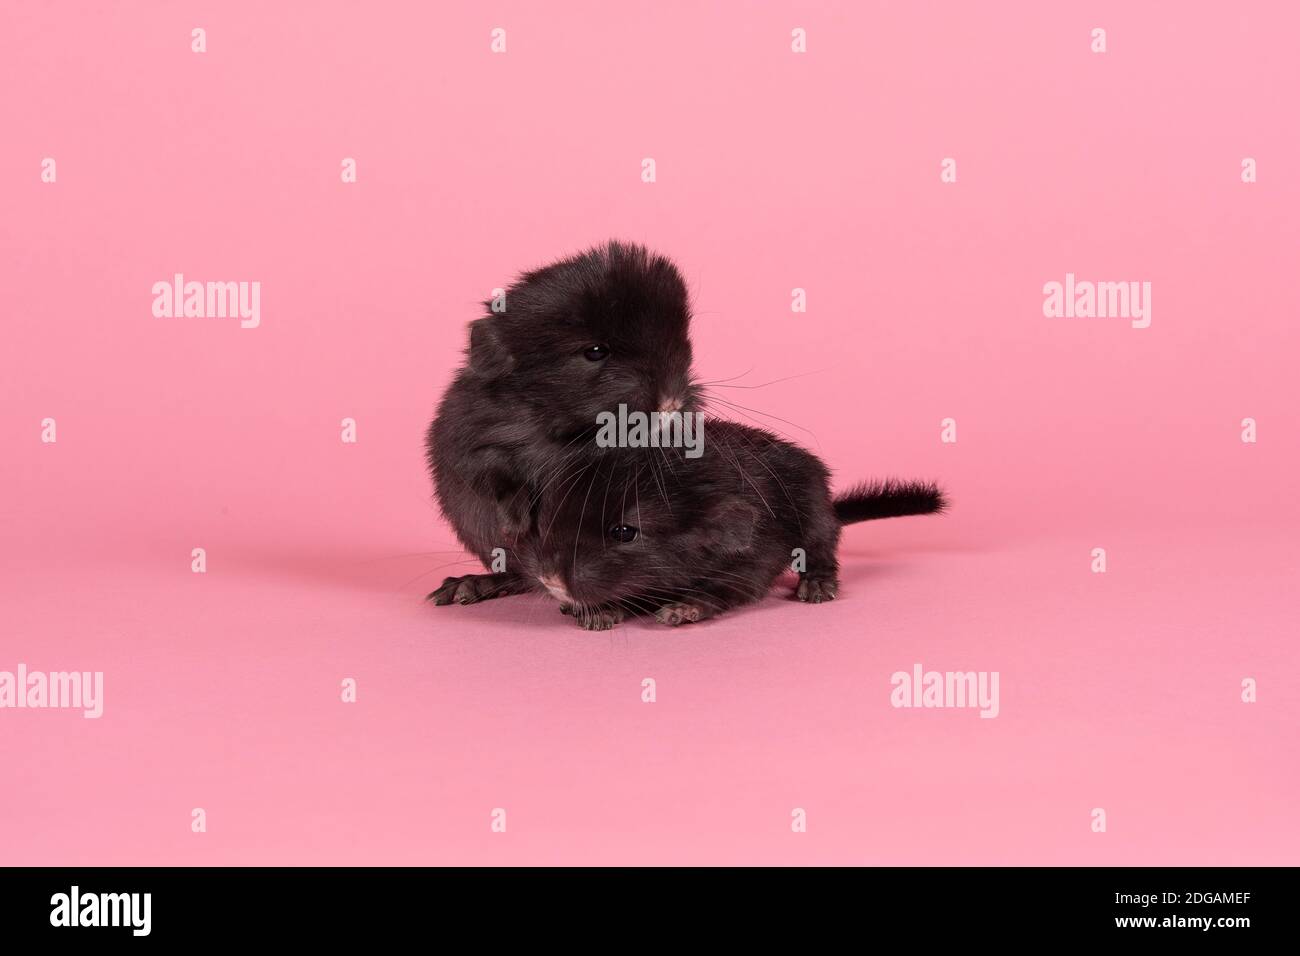 Two cute black baby chinchillas together on a pink background Stock Photo